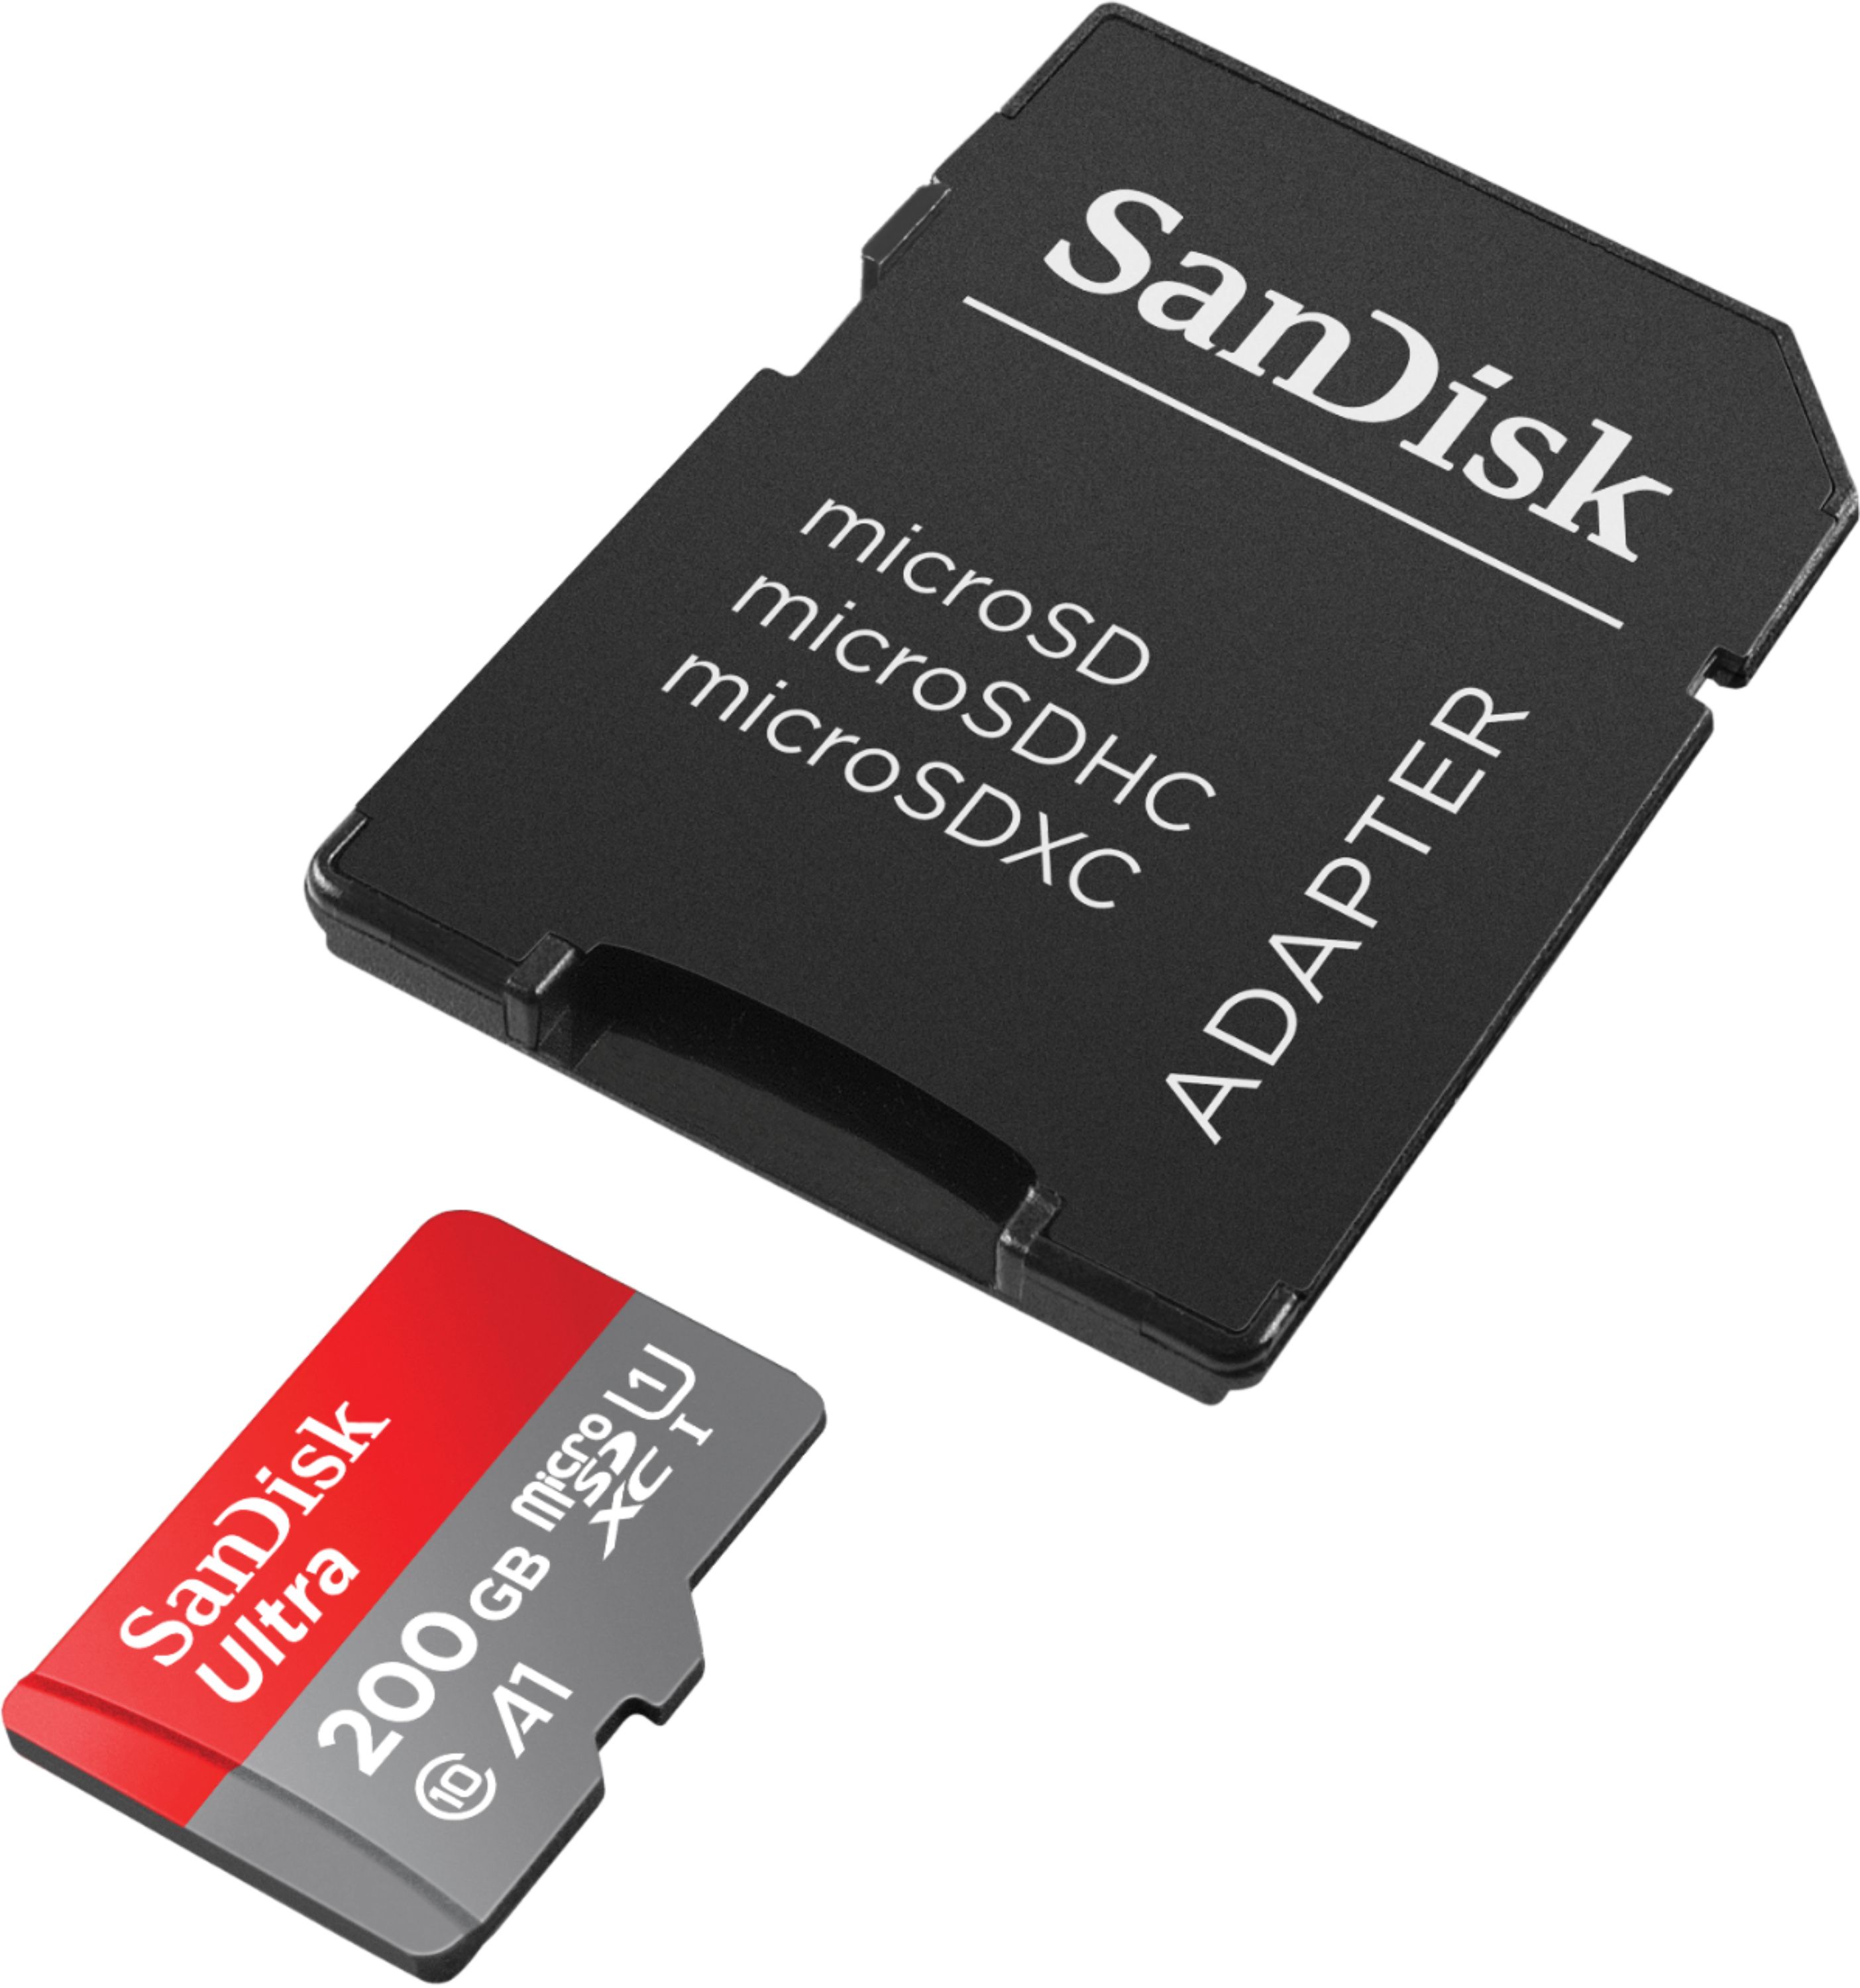 SanDisk Ultra 200GB MicroSDXC Verified for Alcatel Shine LITE by SanFlash 100MBs A1 U1 C10 Works with SanDisk 